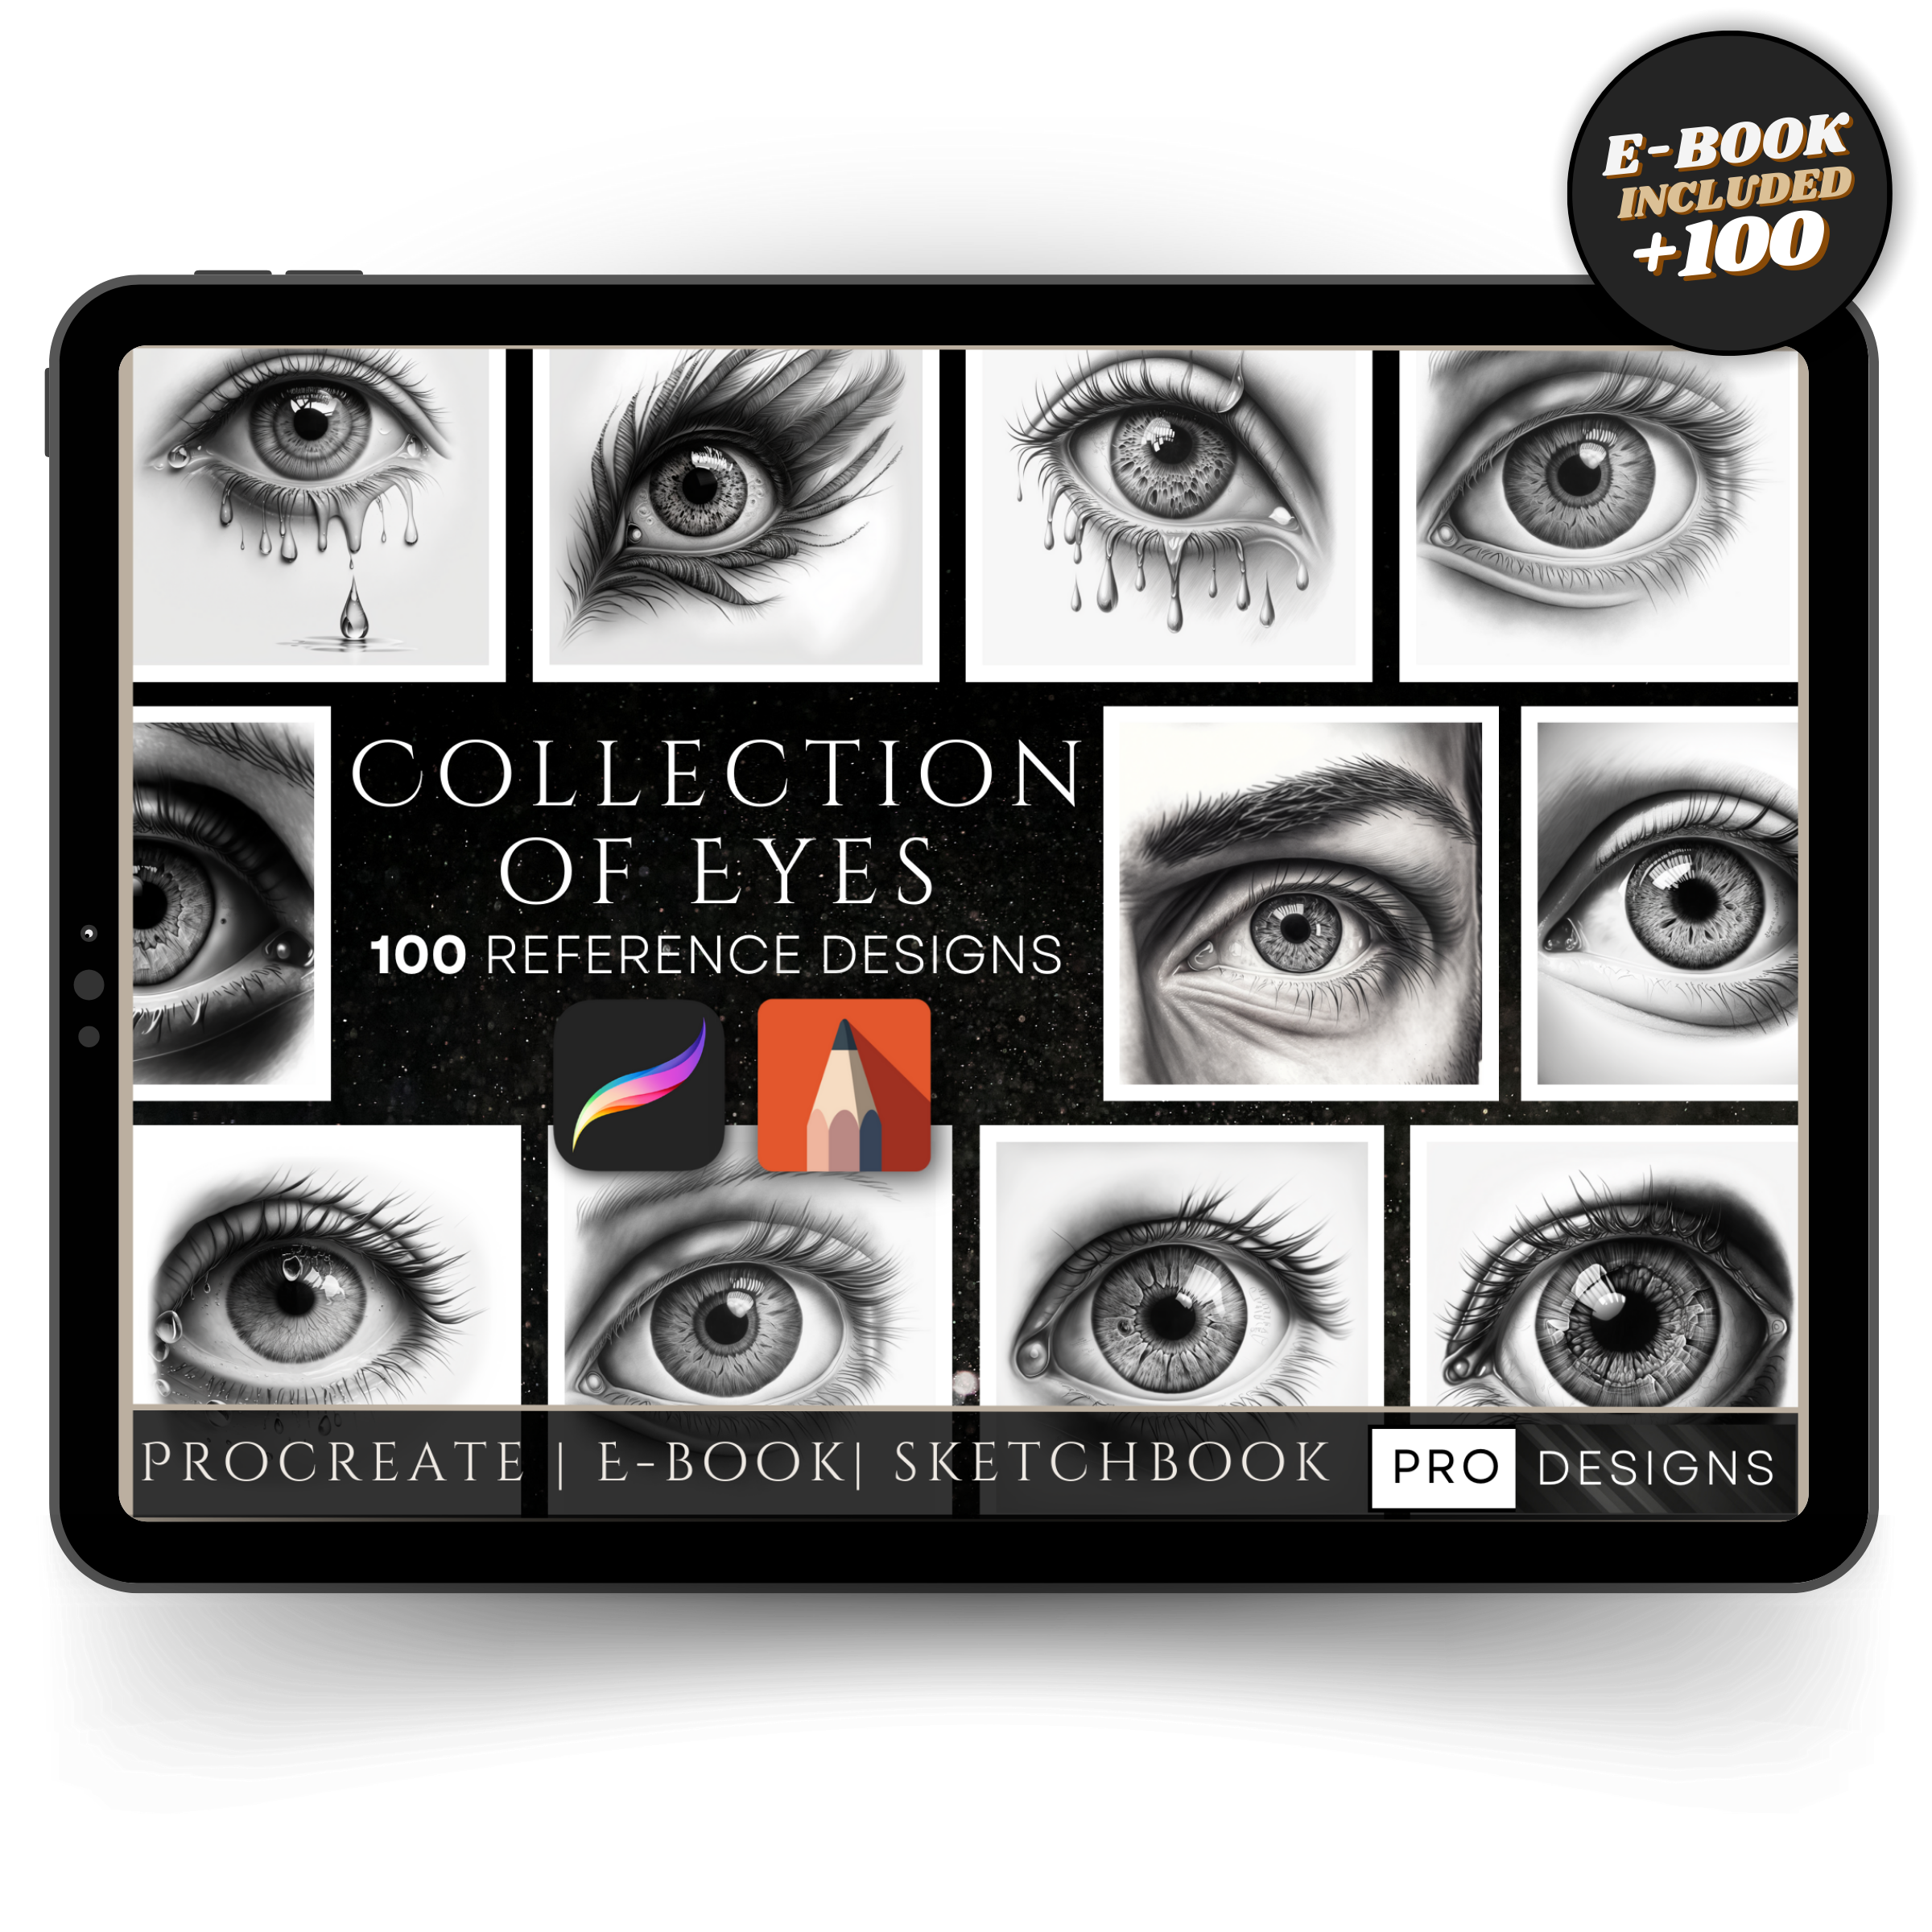 "Eyes of the World" - A Captivating Collection of Visionary Art